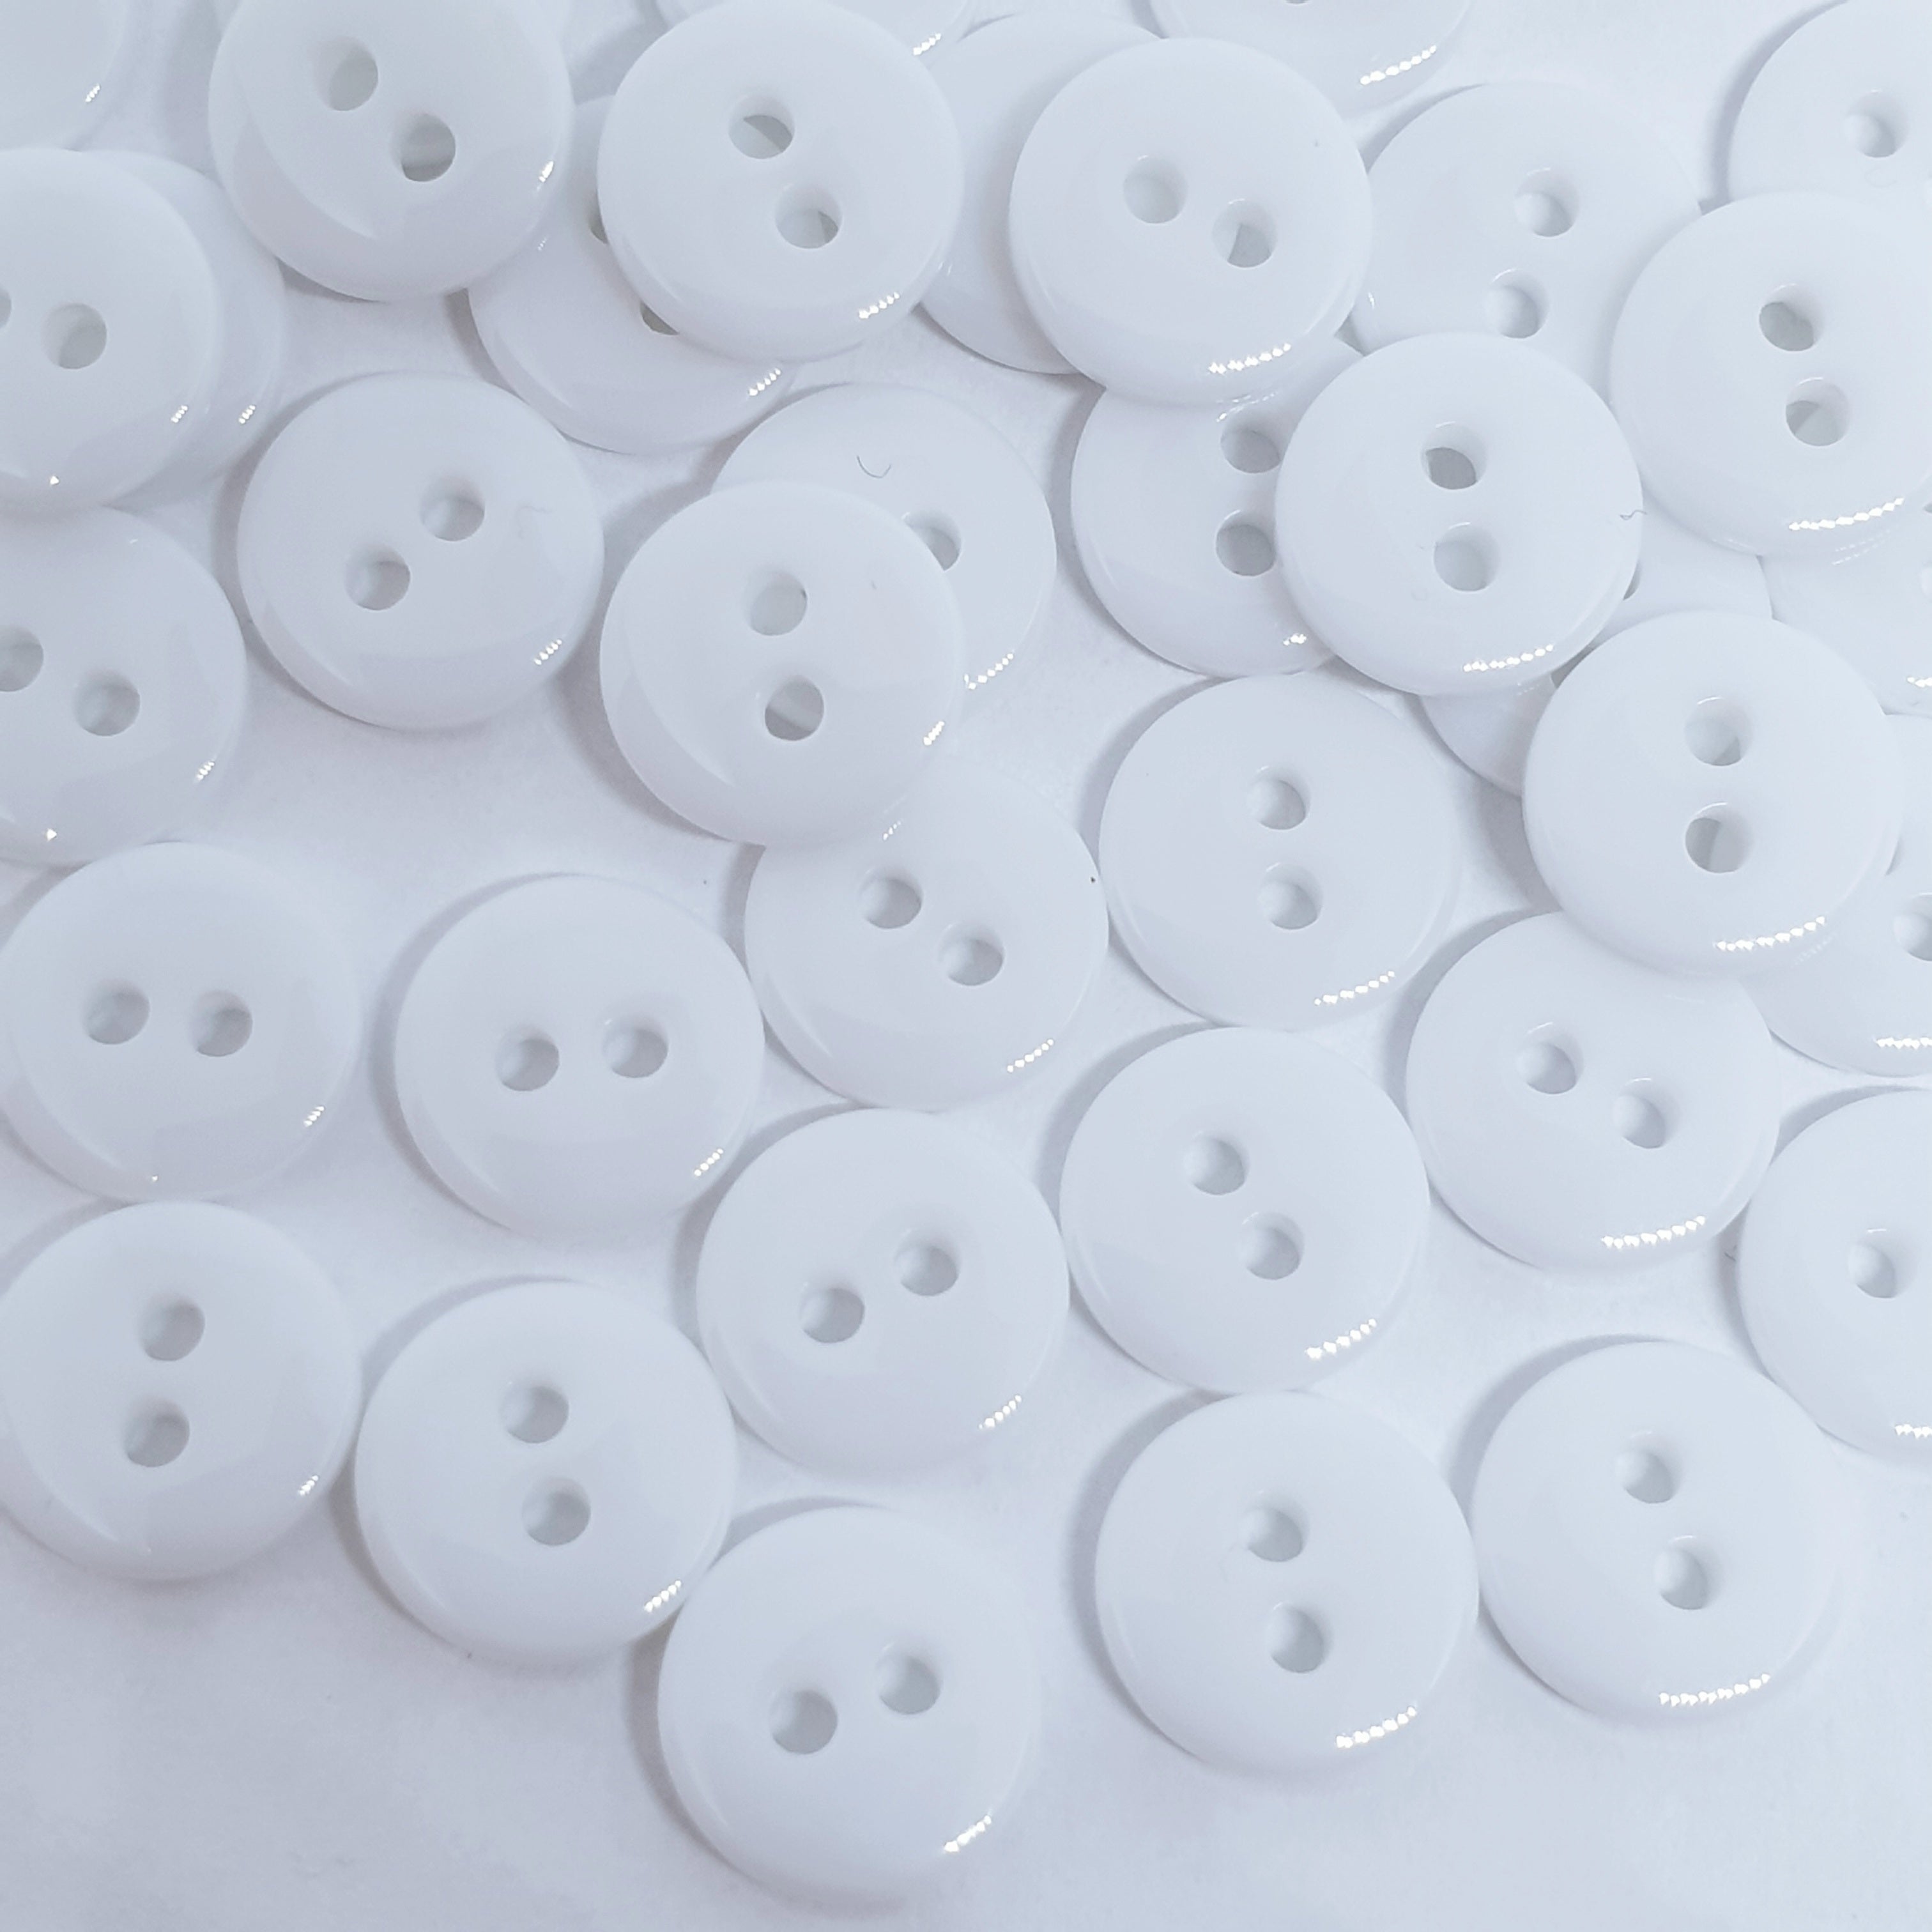 MajorCrafts 120pcs 10mm White 2 Holes Small Round Resin Sewing Buttons